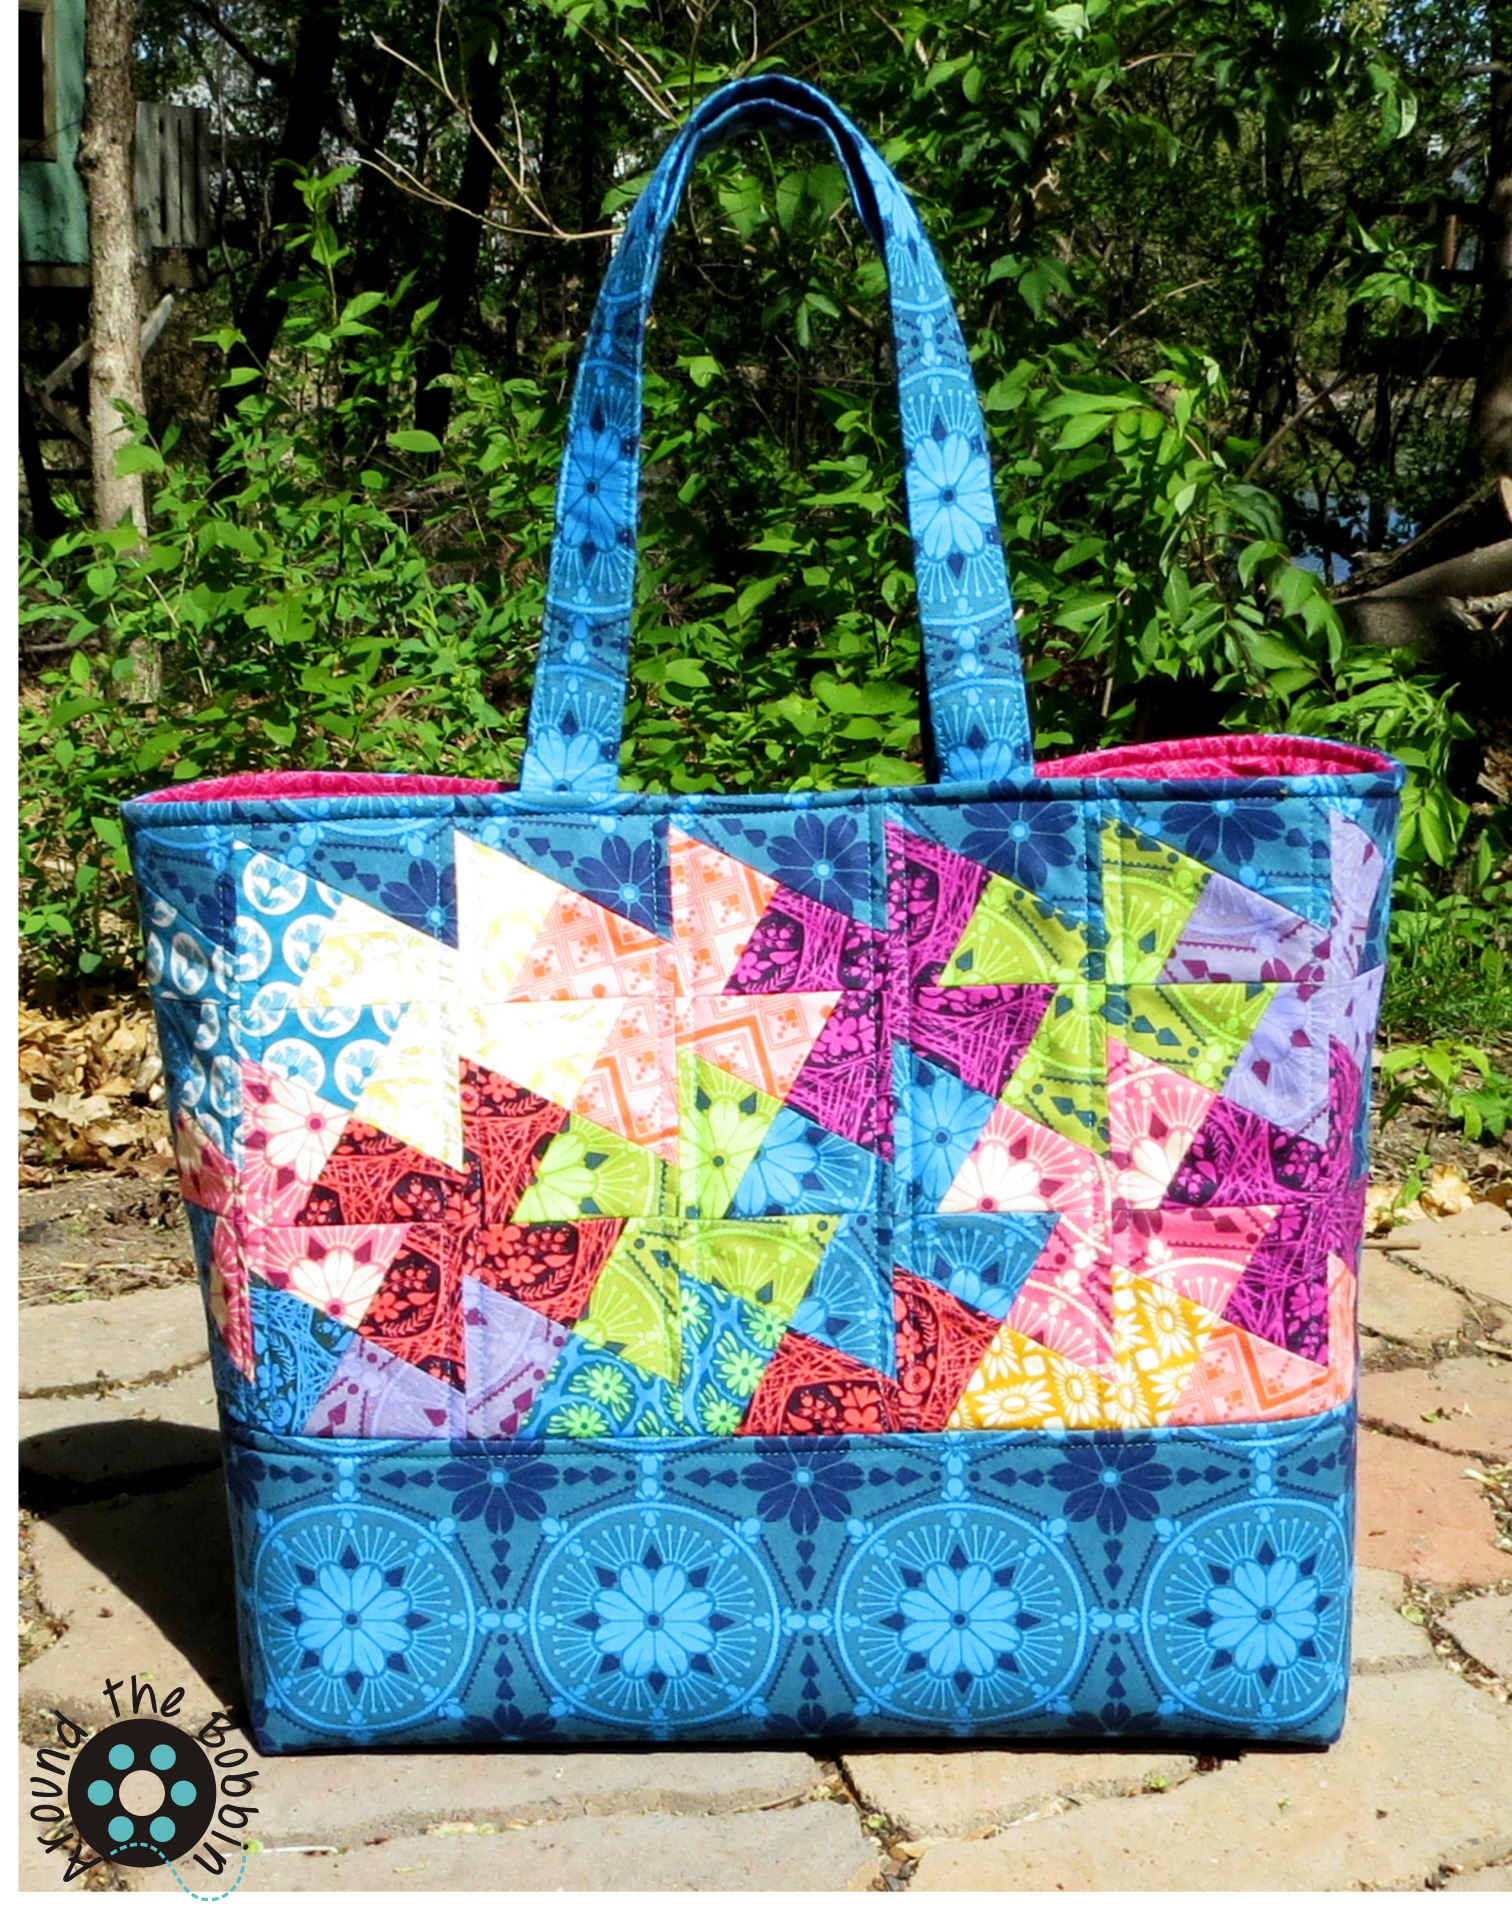 Tote #12 Simply Charming Twister Tote